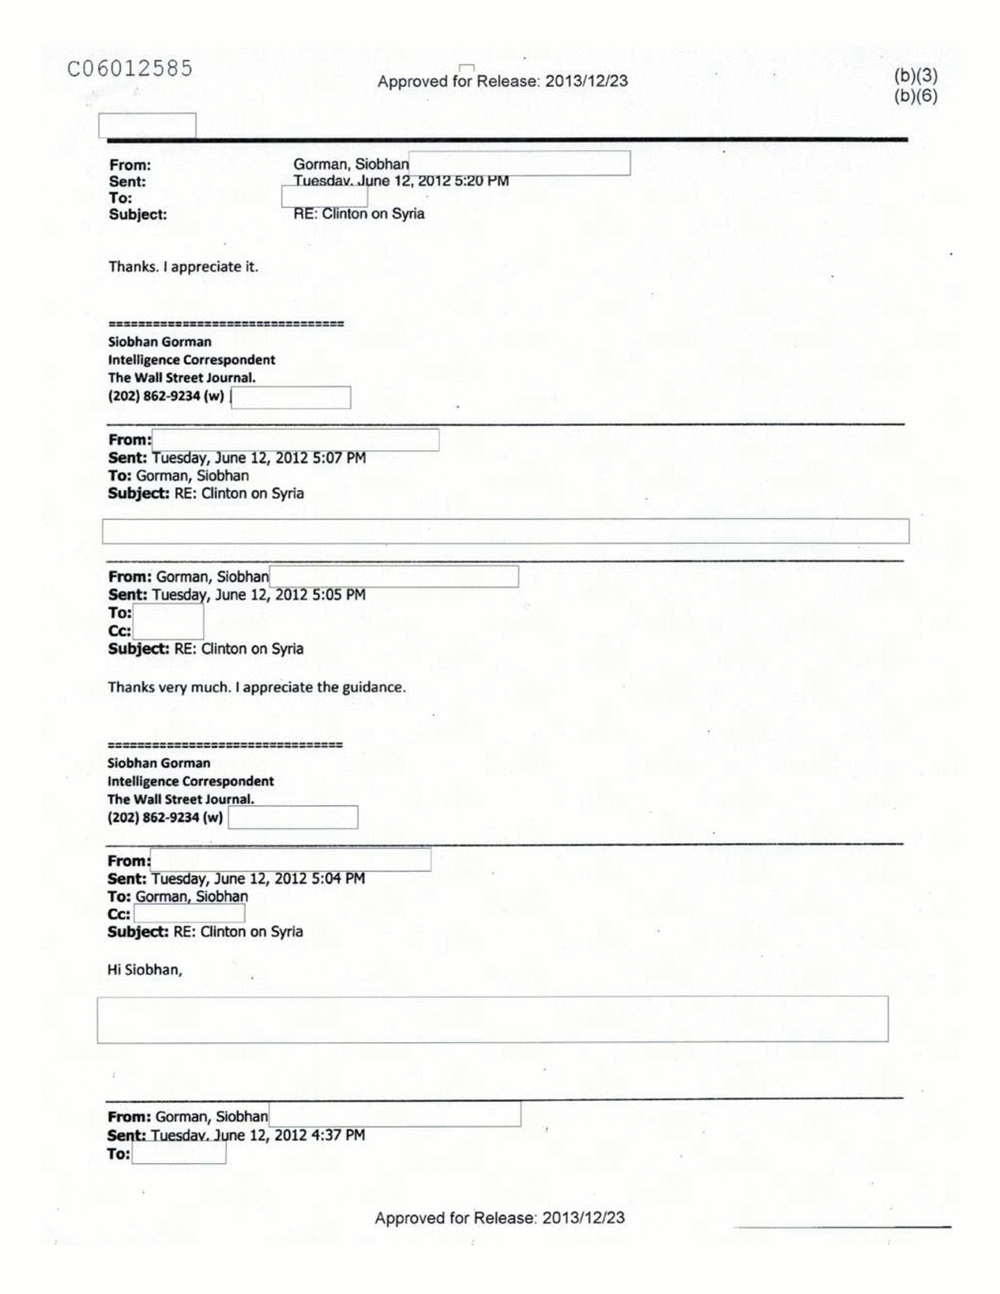 Page 129 from Email Correspondence Between Reporters and CIA Flacks